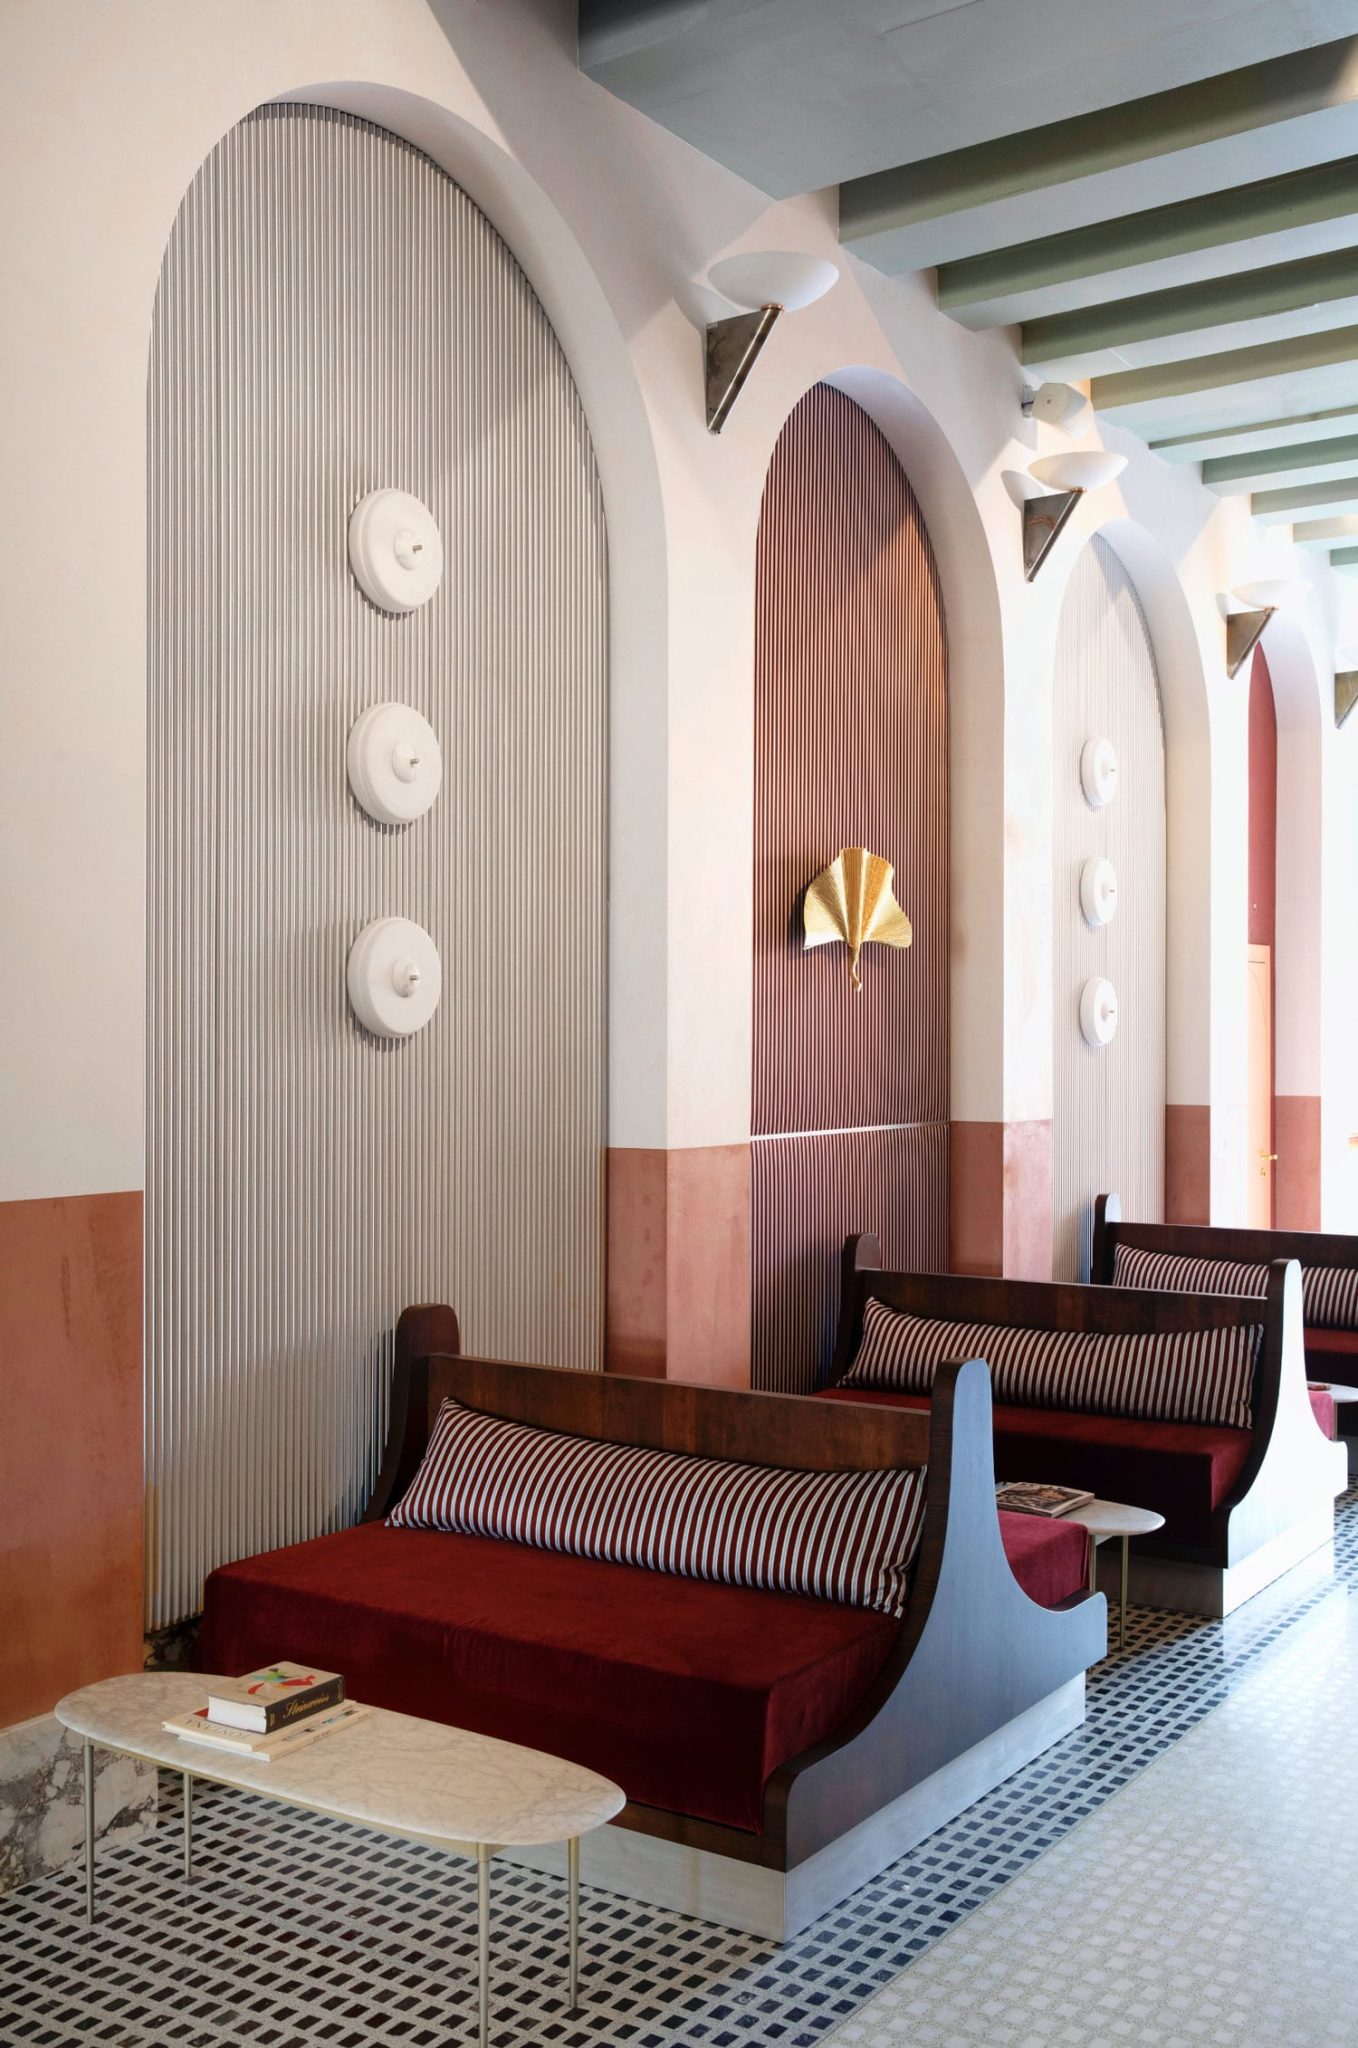 the siting room at the entrance - mediterranean hotel by dorothee Meilichzon